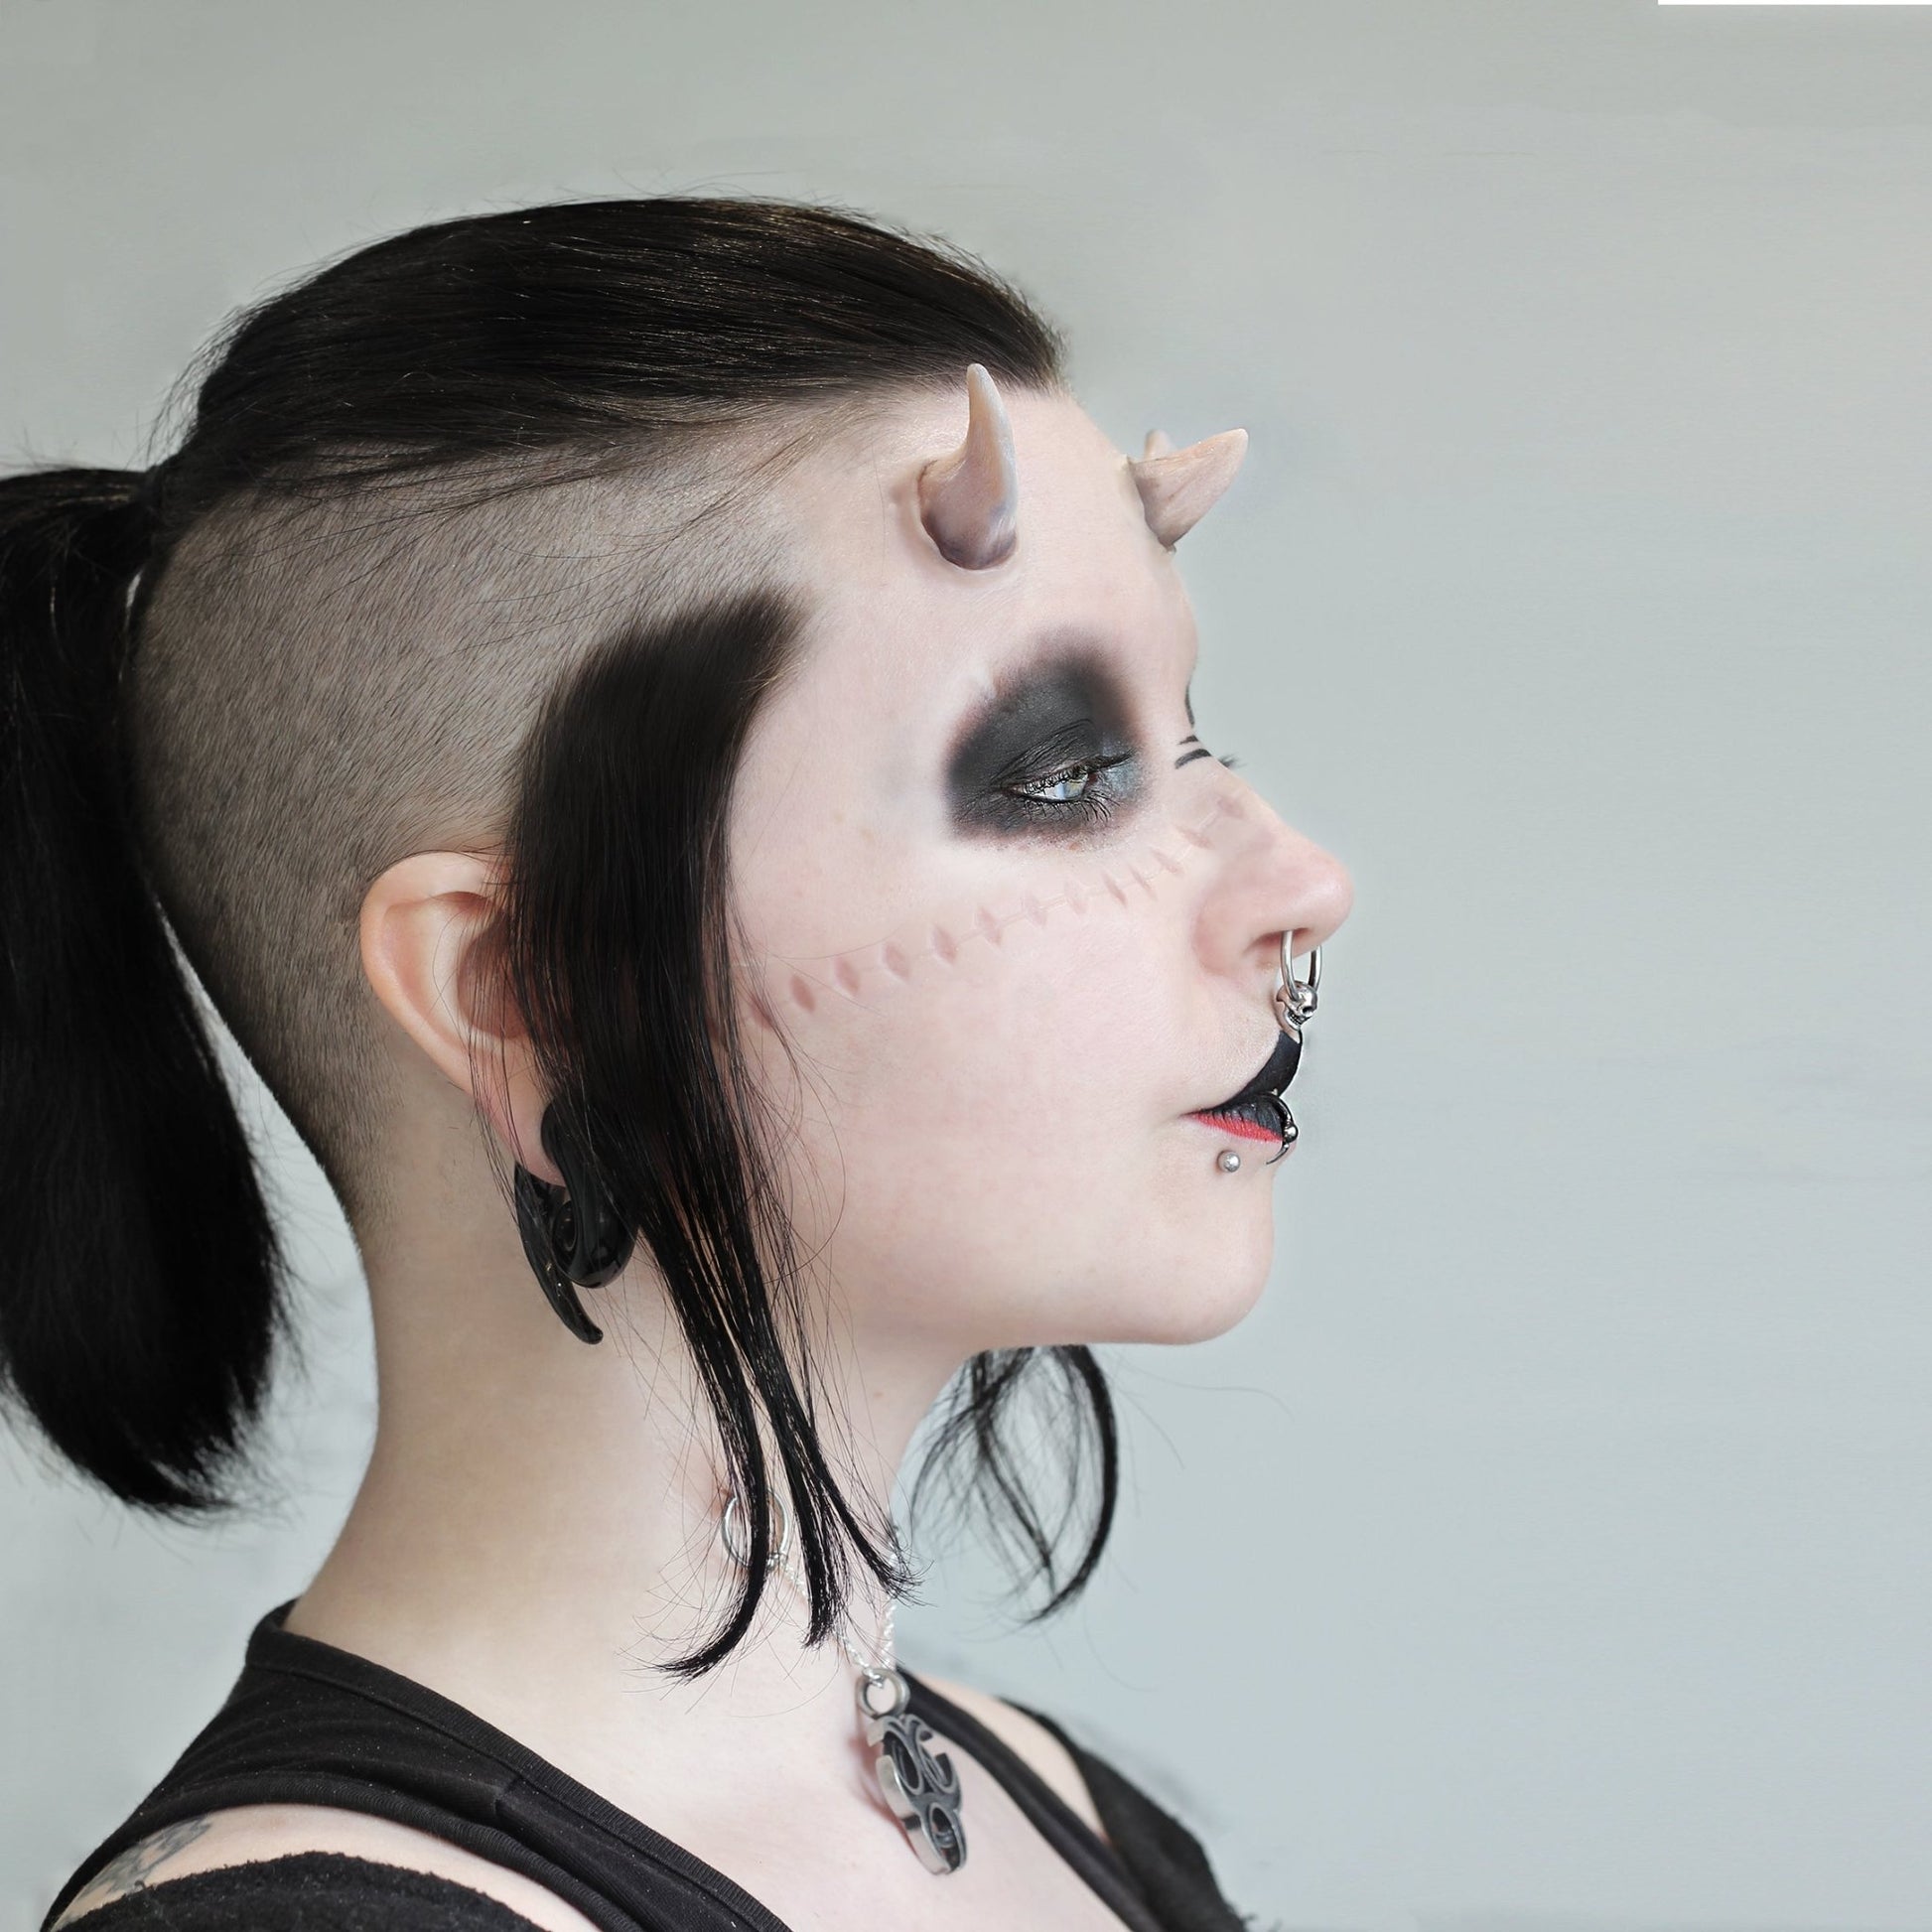 Woman with black hair wearing crooked horns and dark makeup